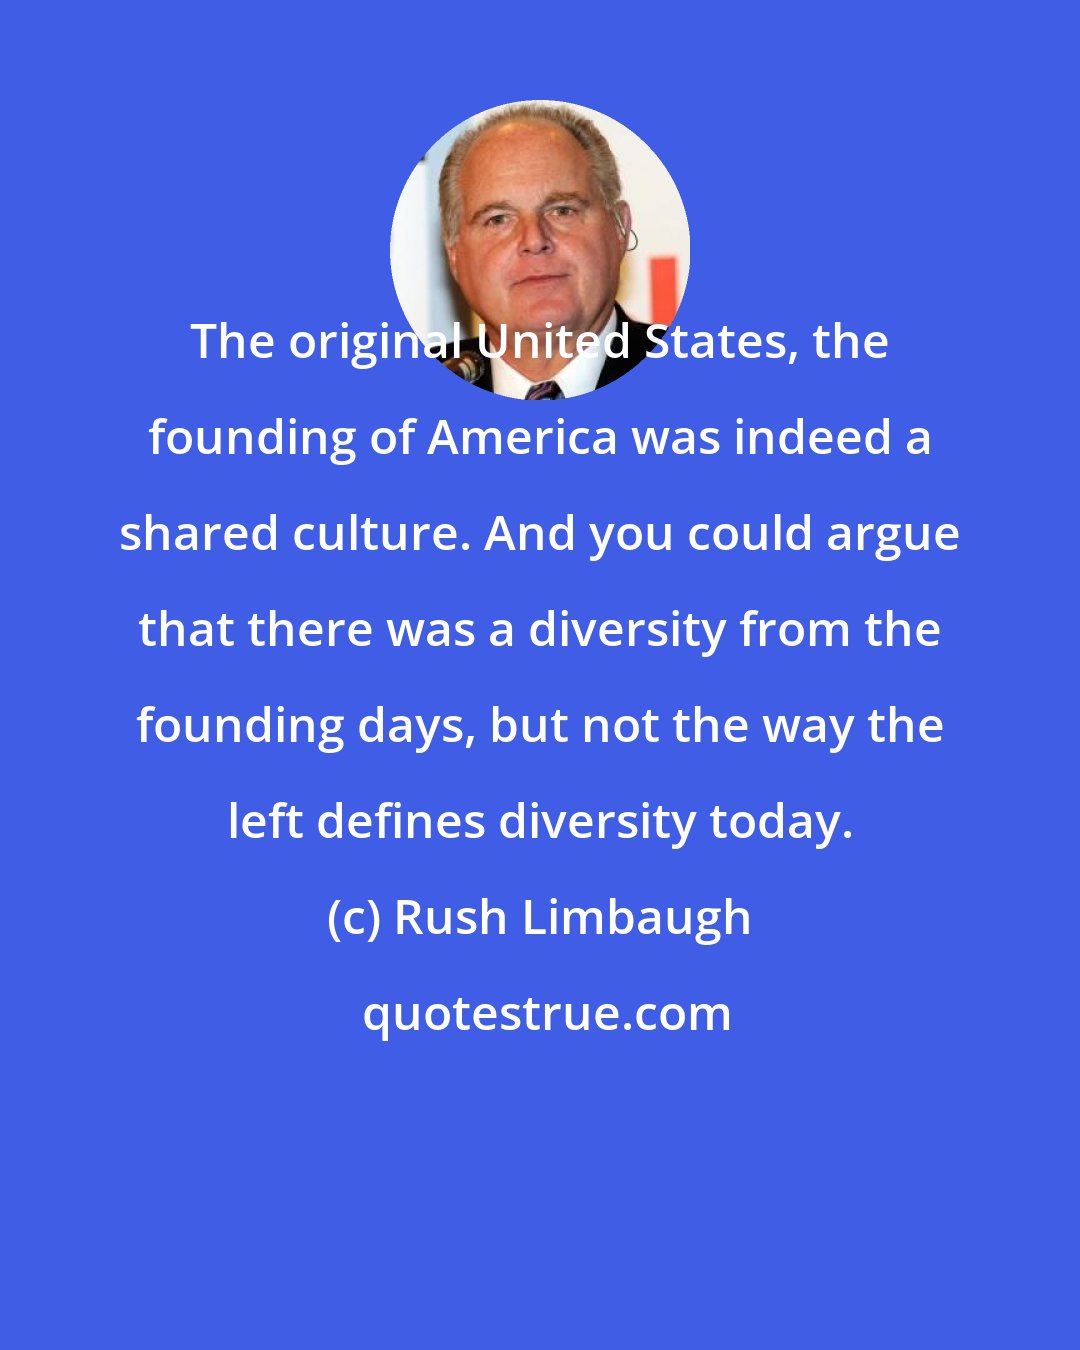 Rush Limbaugh: The original United States, the founding of America was indeed a shared culture. And you could argue that there was a diversity from the founding days, but not the way the left defines diversity today.